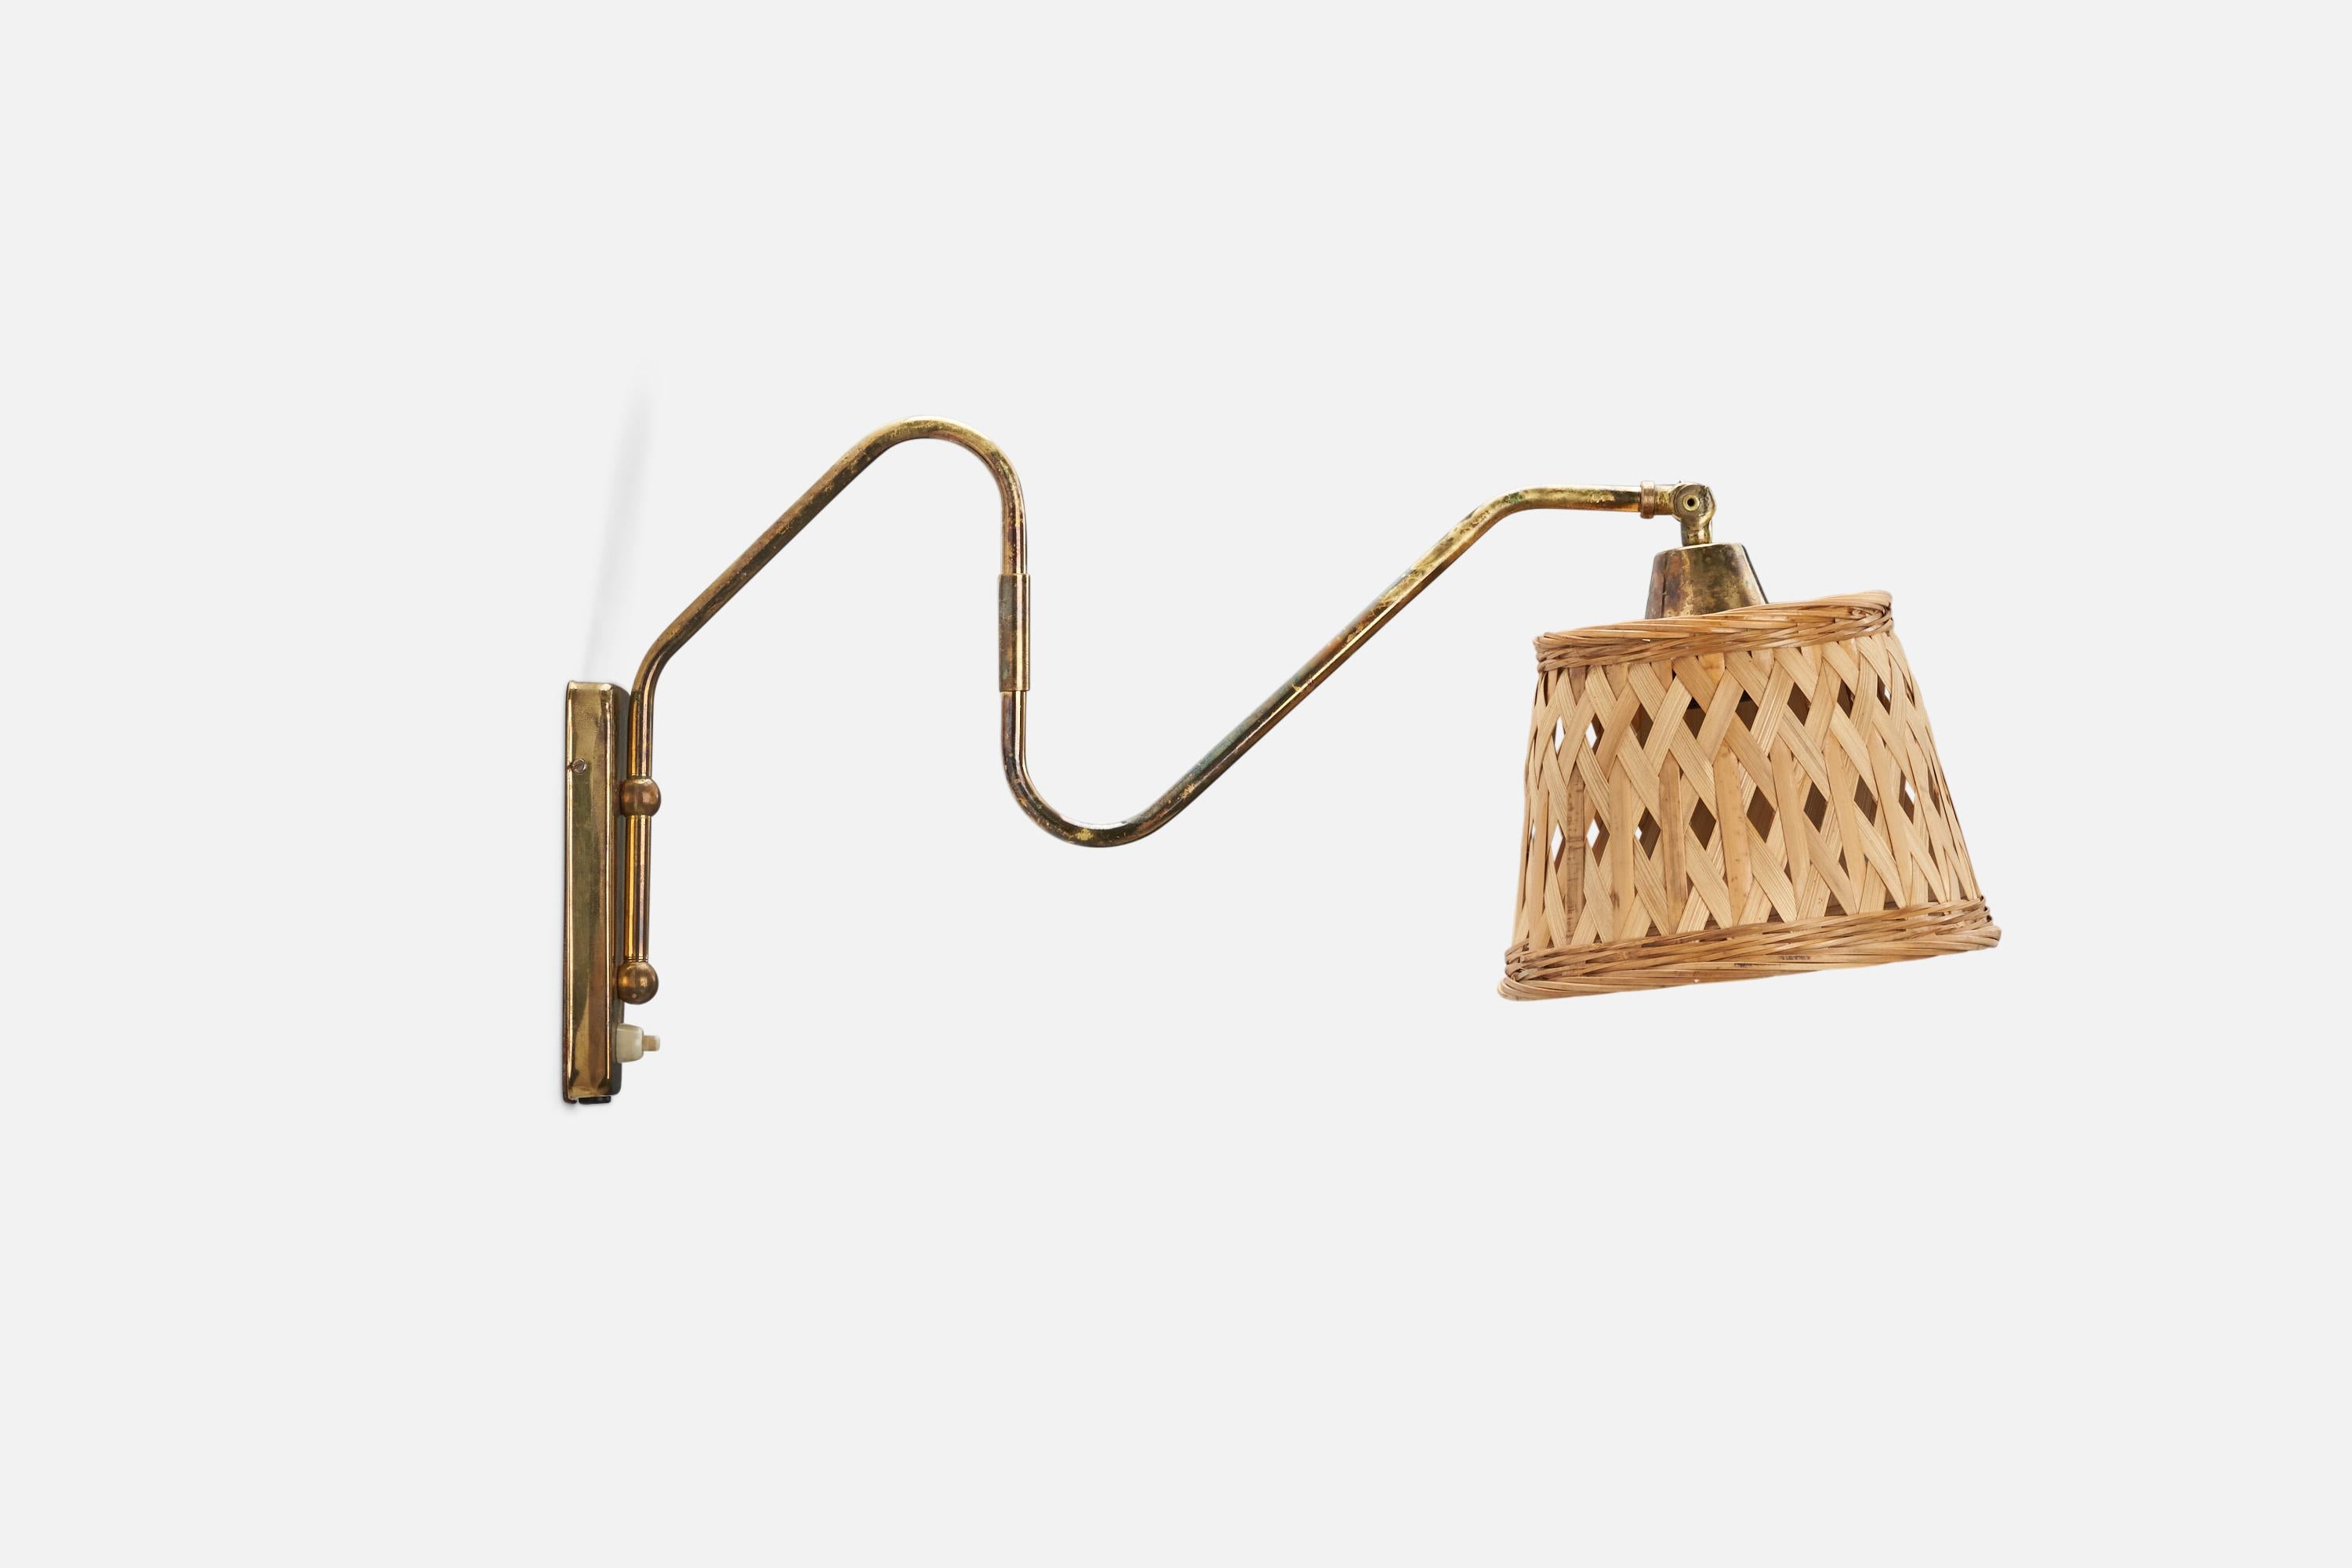 A brass and rattan wall light designed and produced by a Danish Designer, Denmark, 1940s.

Dimensions stated are of sconce with lampshade.

Dimensions variable, measured as illustrated in first image.

Dimensions of back plate (inches) : 5.98